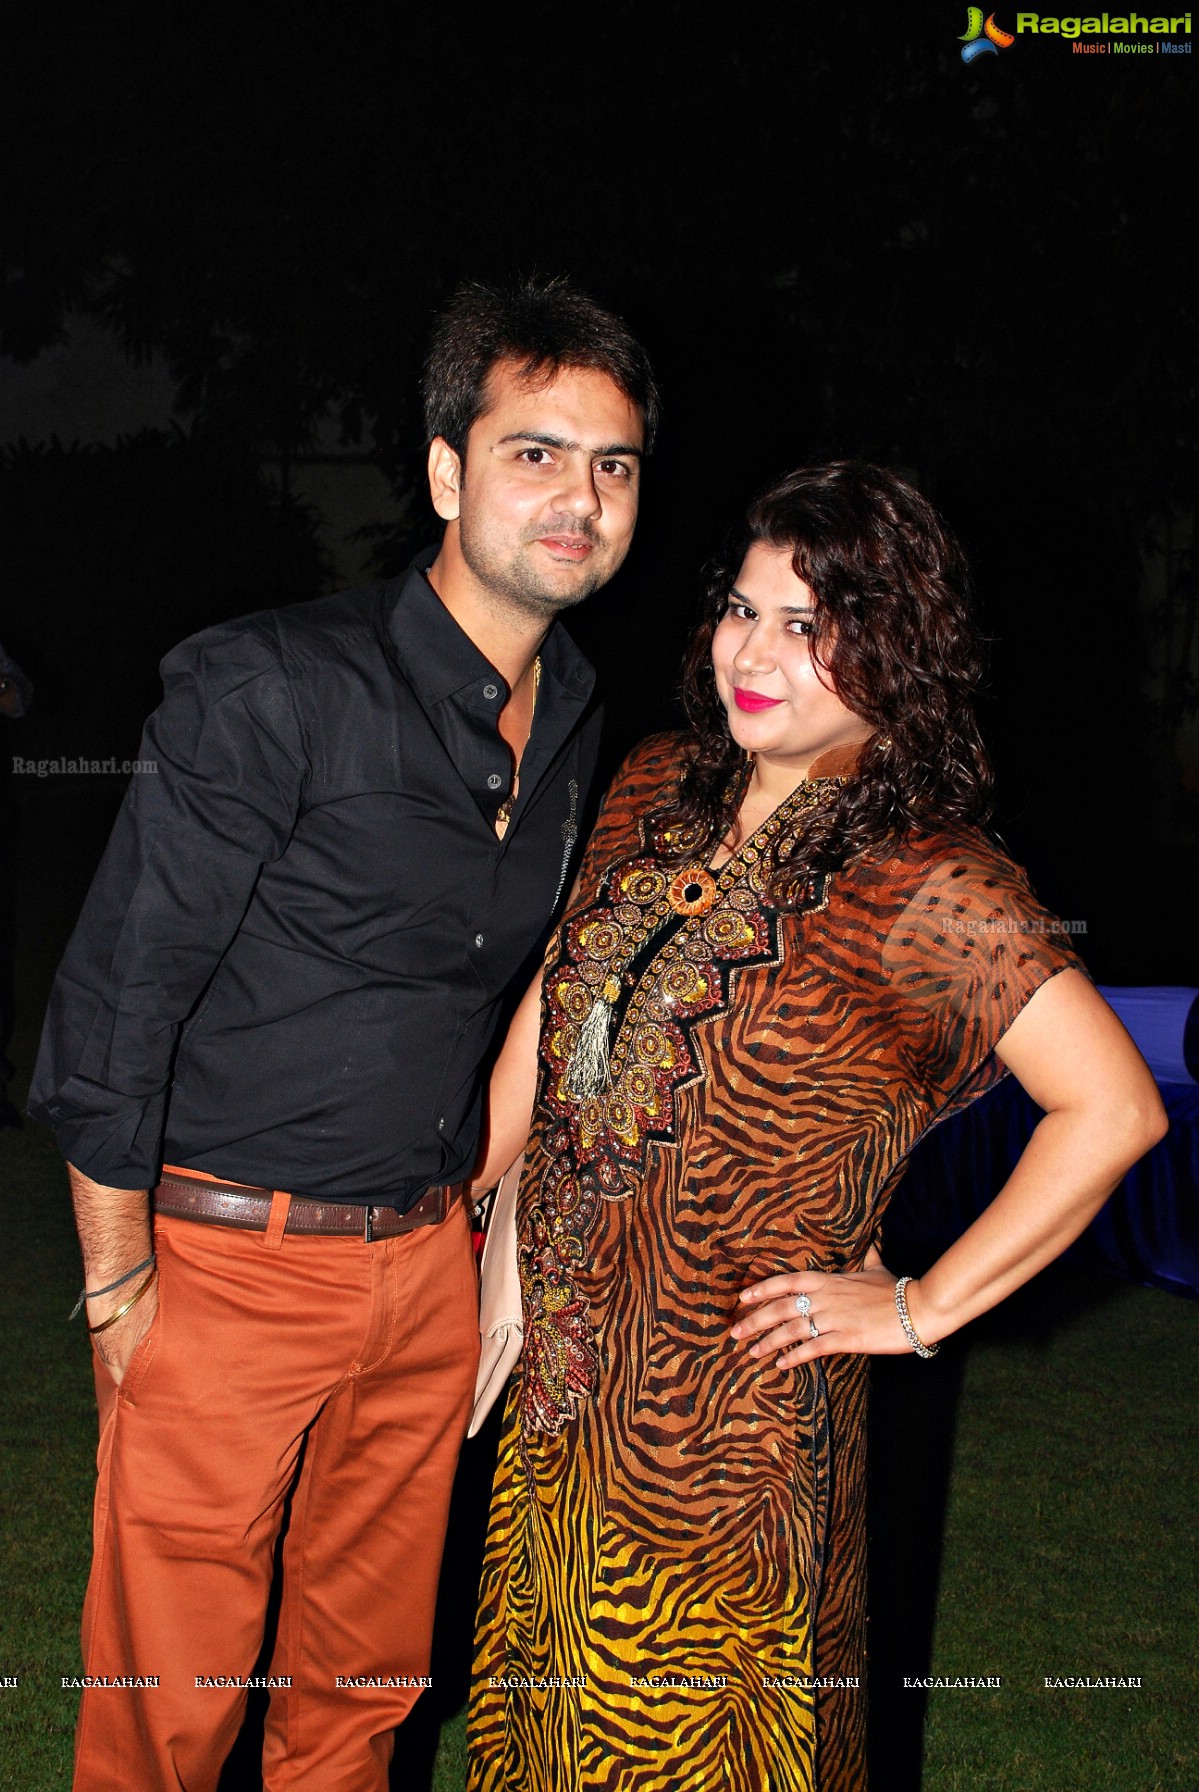 Sparks and Sizzles Party by Atish and Mala Agarwal